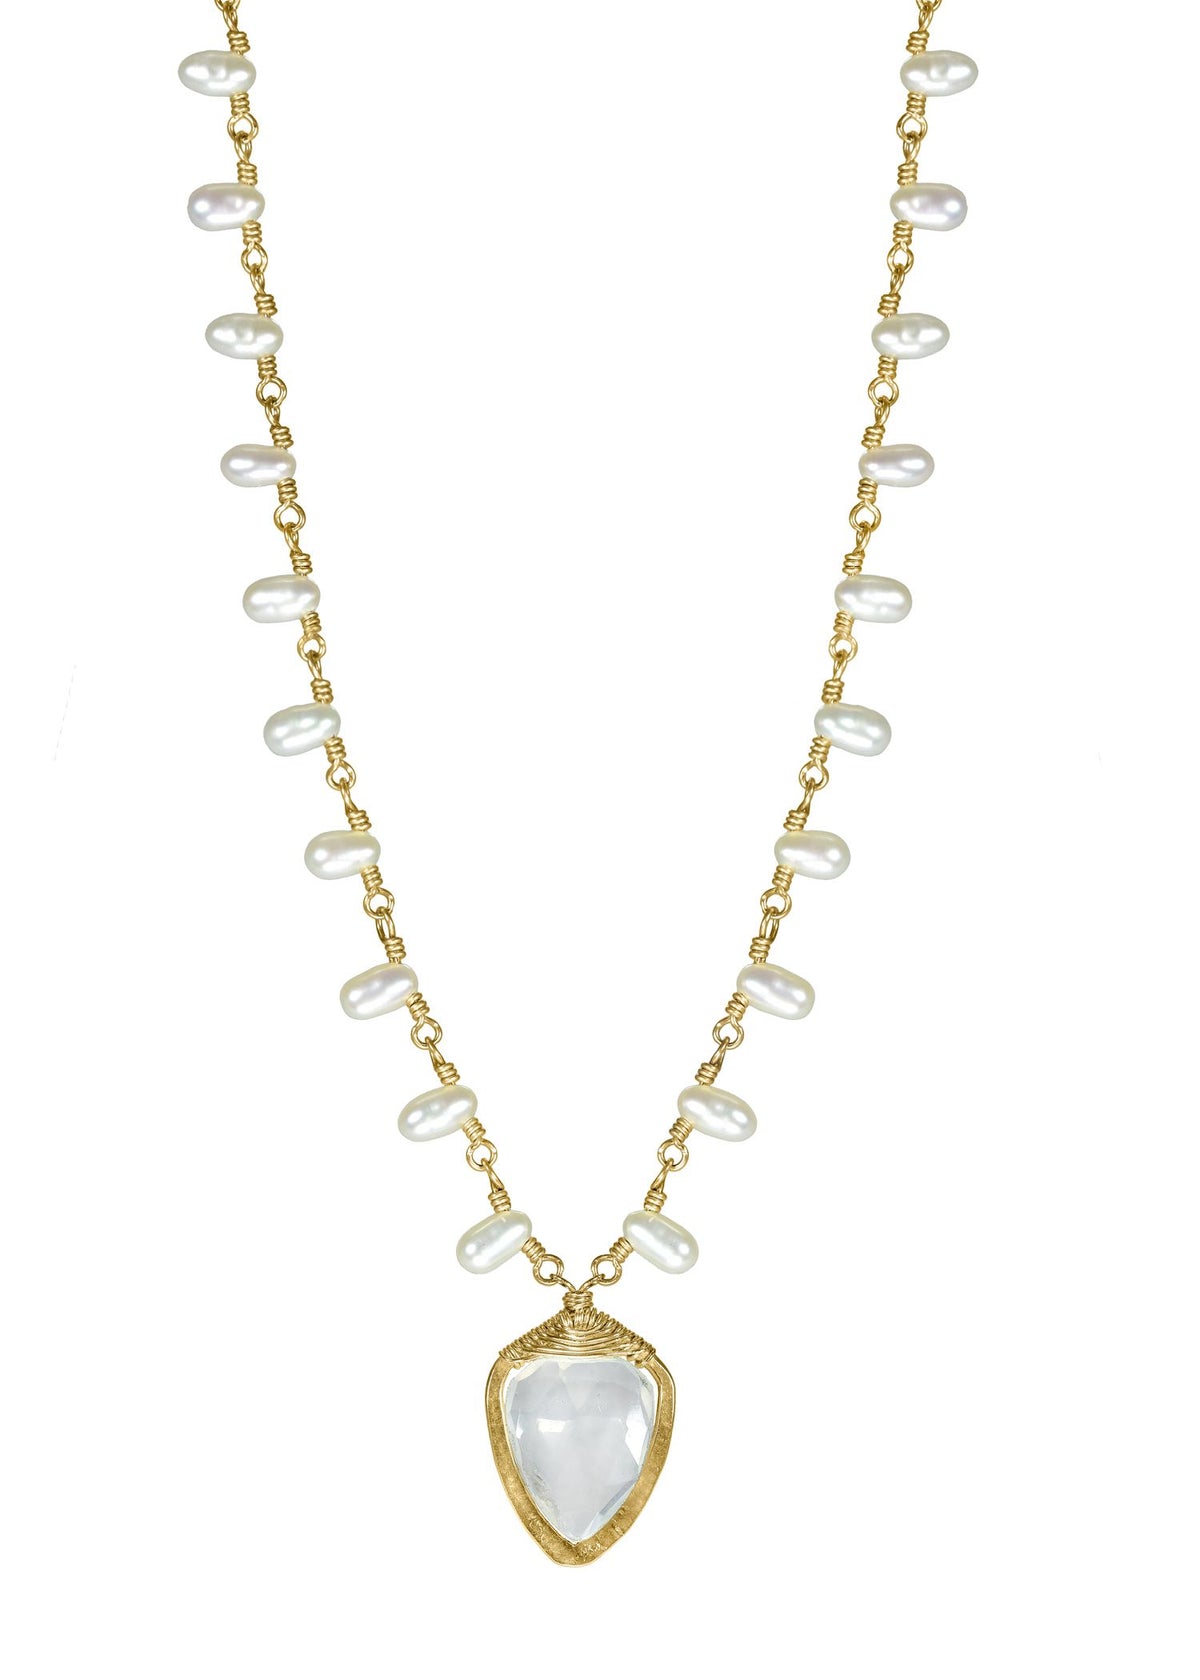 White moonstone Fresh water pearl 14k gold fill Necklace measures 17-1/4” in length Pendant measures 11/16&quot;in length and 7/16&quot; in width Handmade in our Los Angeles studio